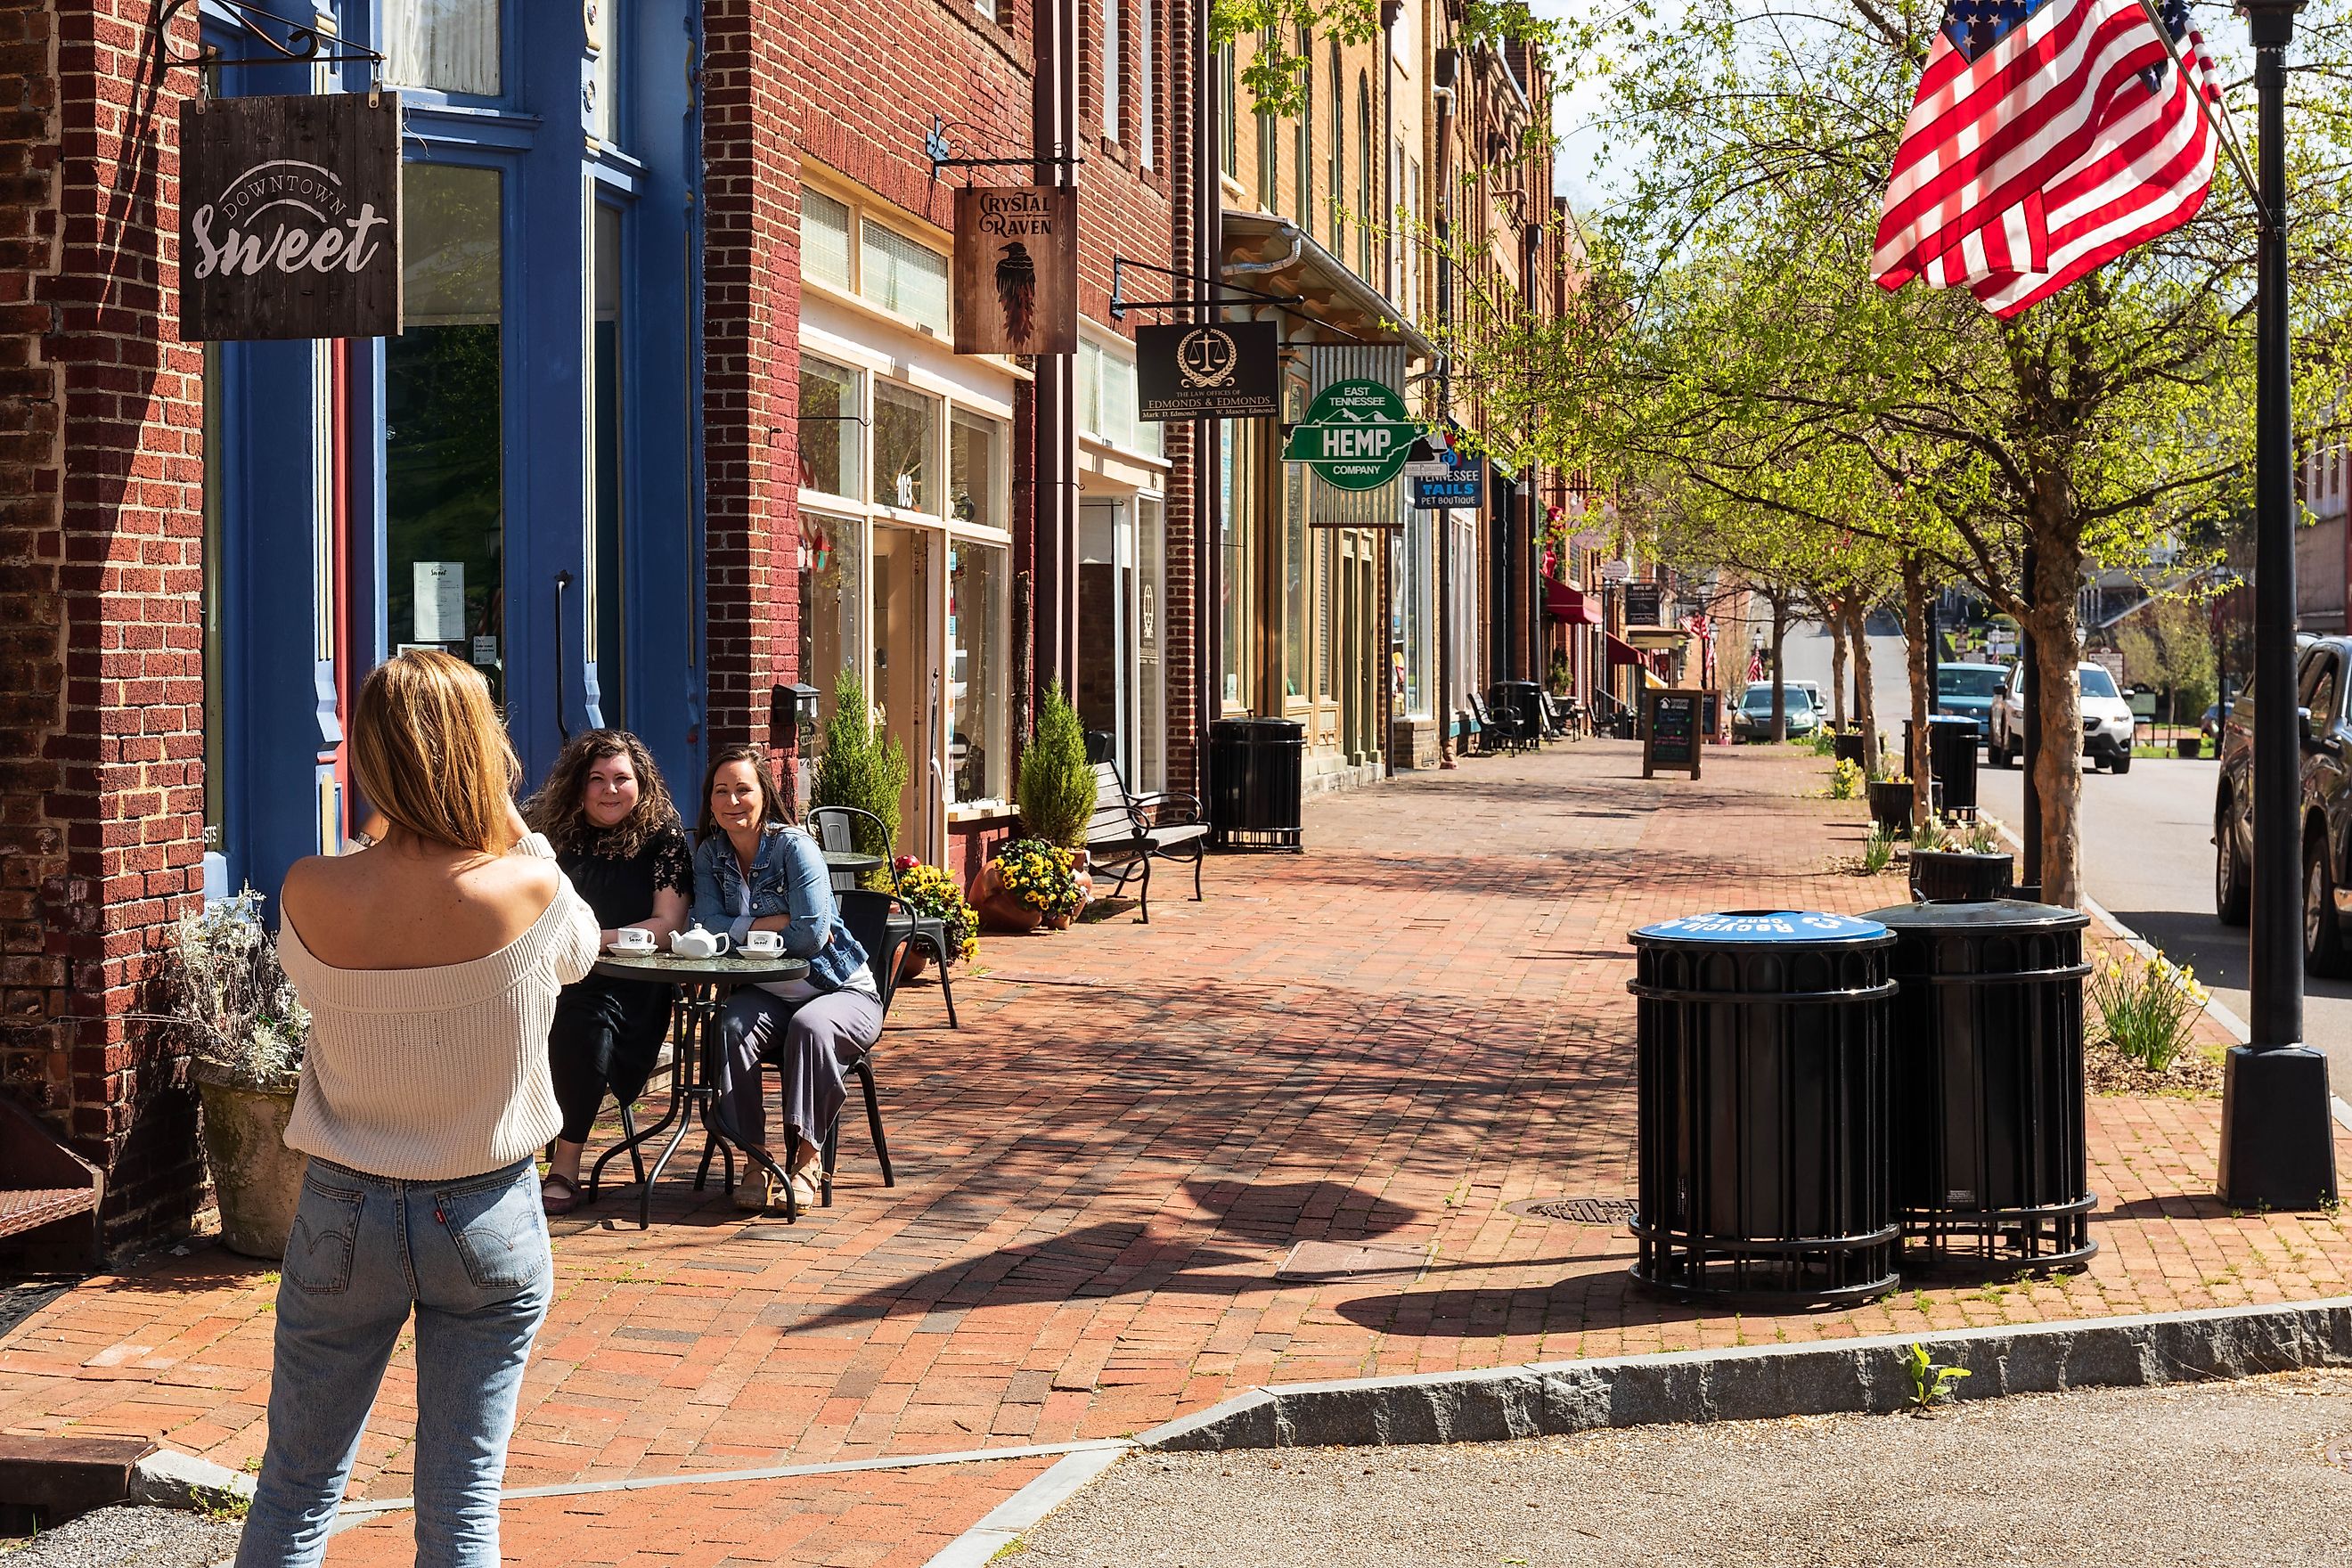 A slender blonde woman's back faces the camera as she photographs two friends at a sidewalk table outside 'Downtown Sweet' in Jonesborough, TN. Editorial credit: Nolichuckyjake / Shutterstock.com